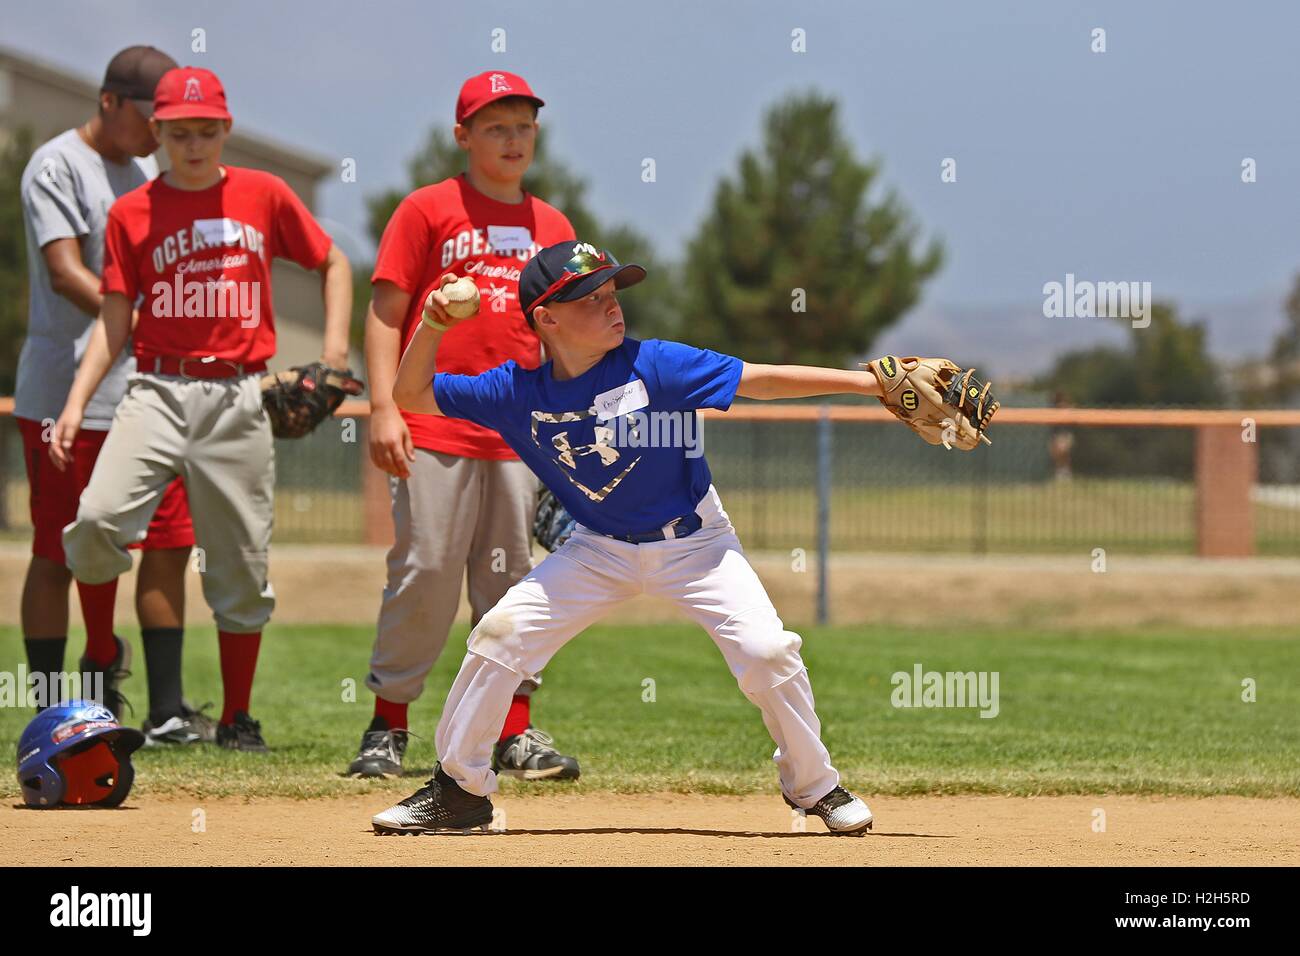 A young boy prepares to throw a ball during a Summer Baseball Camp with former professional baseball player Adrian Burnside at the Wire Mountain Baseball Field July 12, 2016 in Camp Pendleton, California. Stock Photo